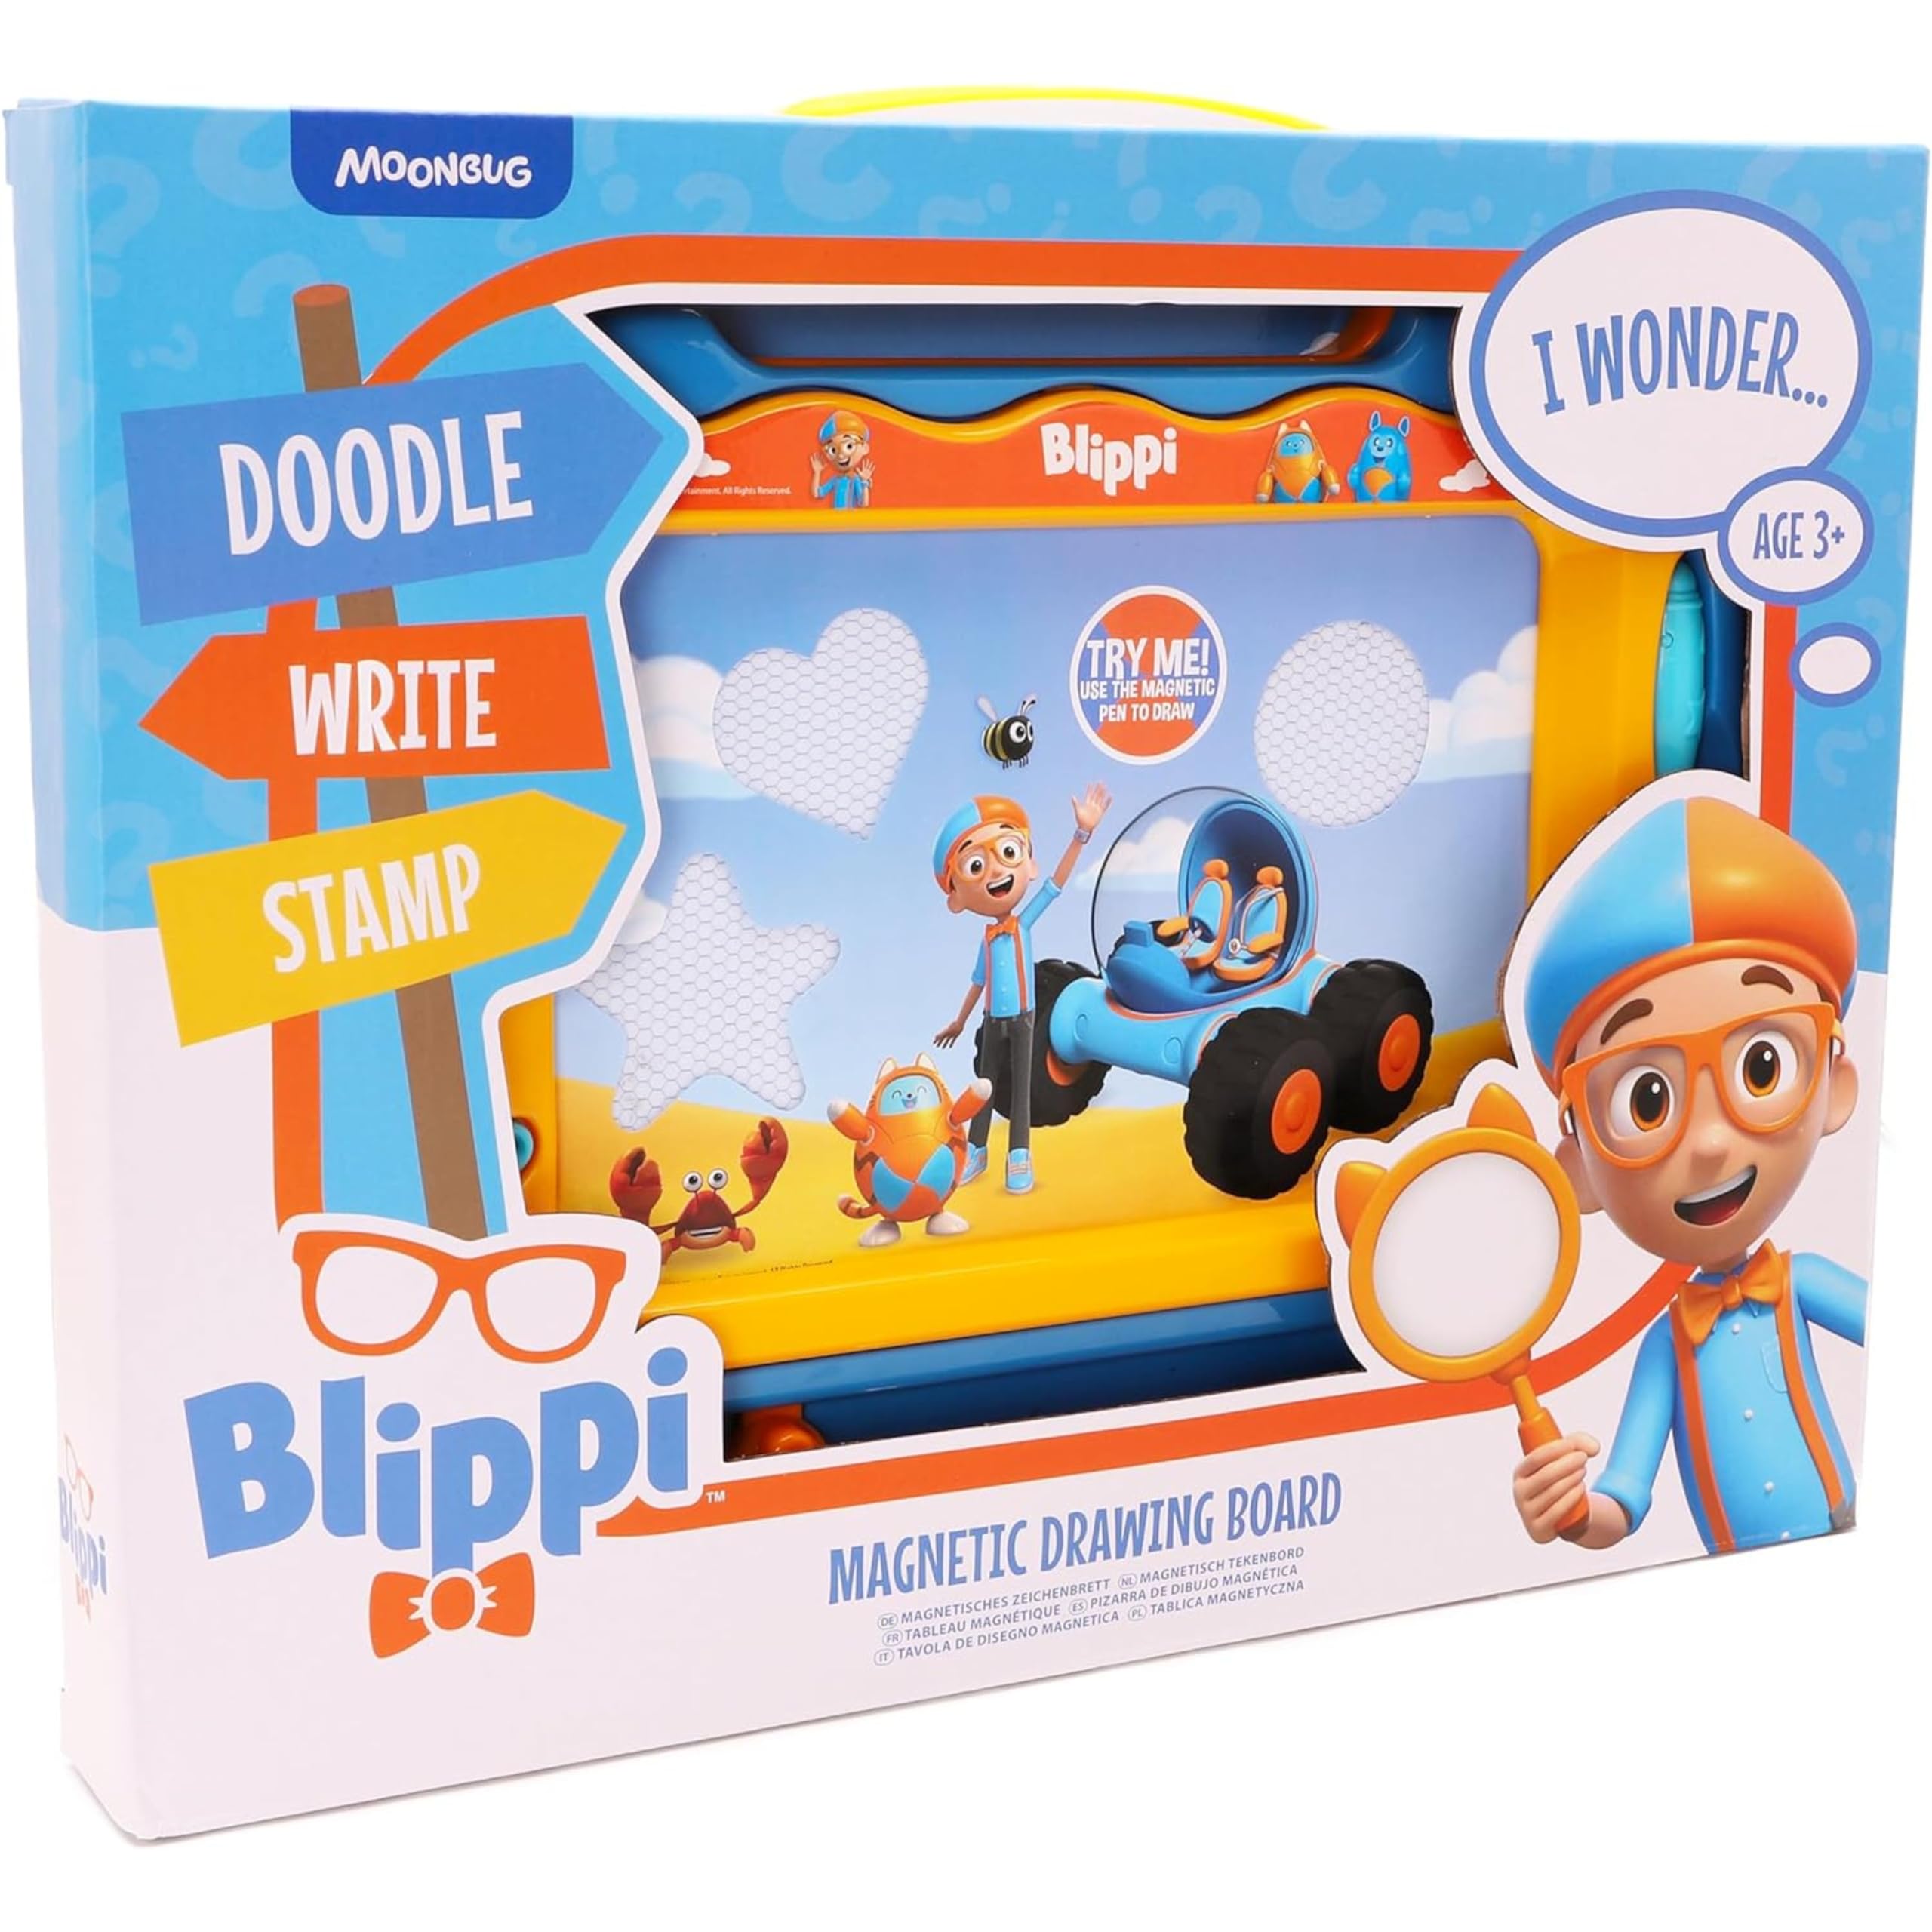 TOYLAND® Blippi Magnetic Drawing Board - Writing & Drawing Tablet - Creative Toys - Ages 3+